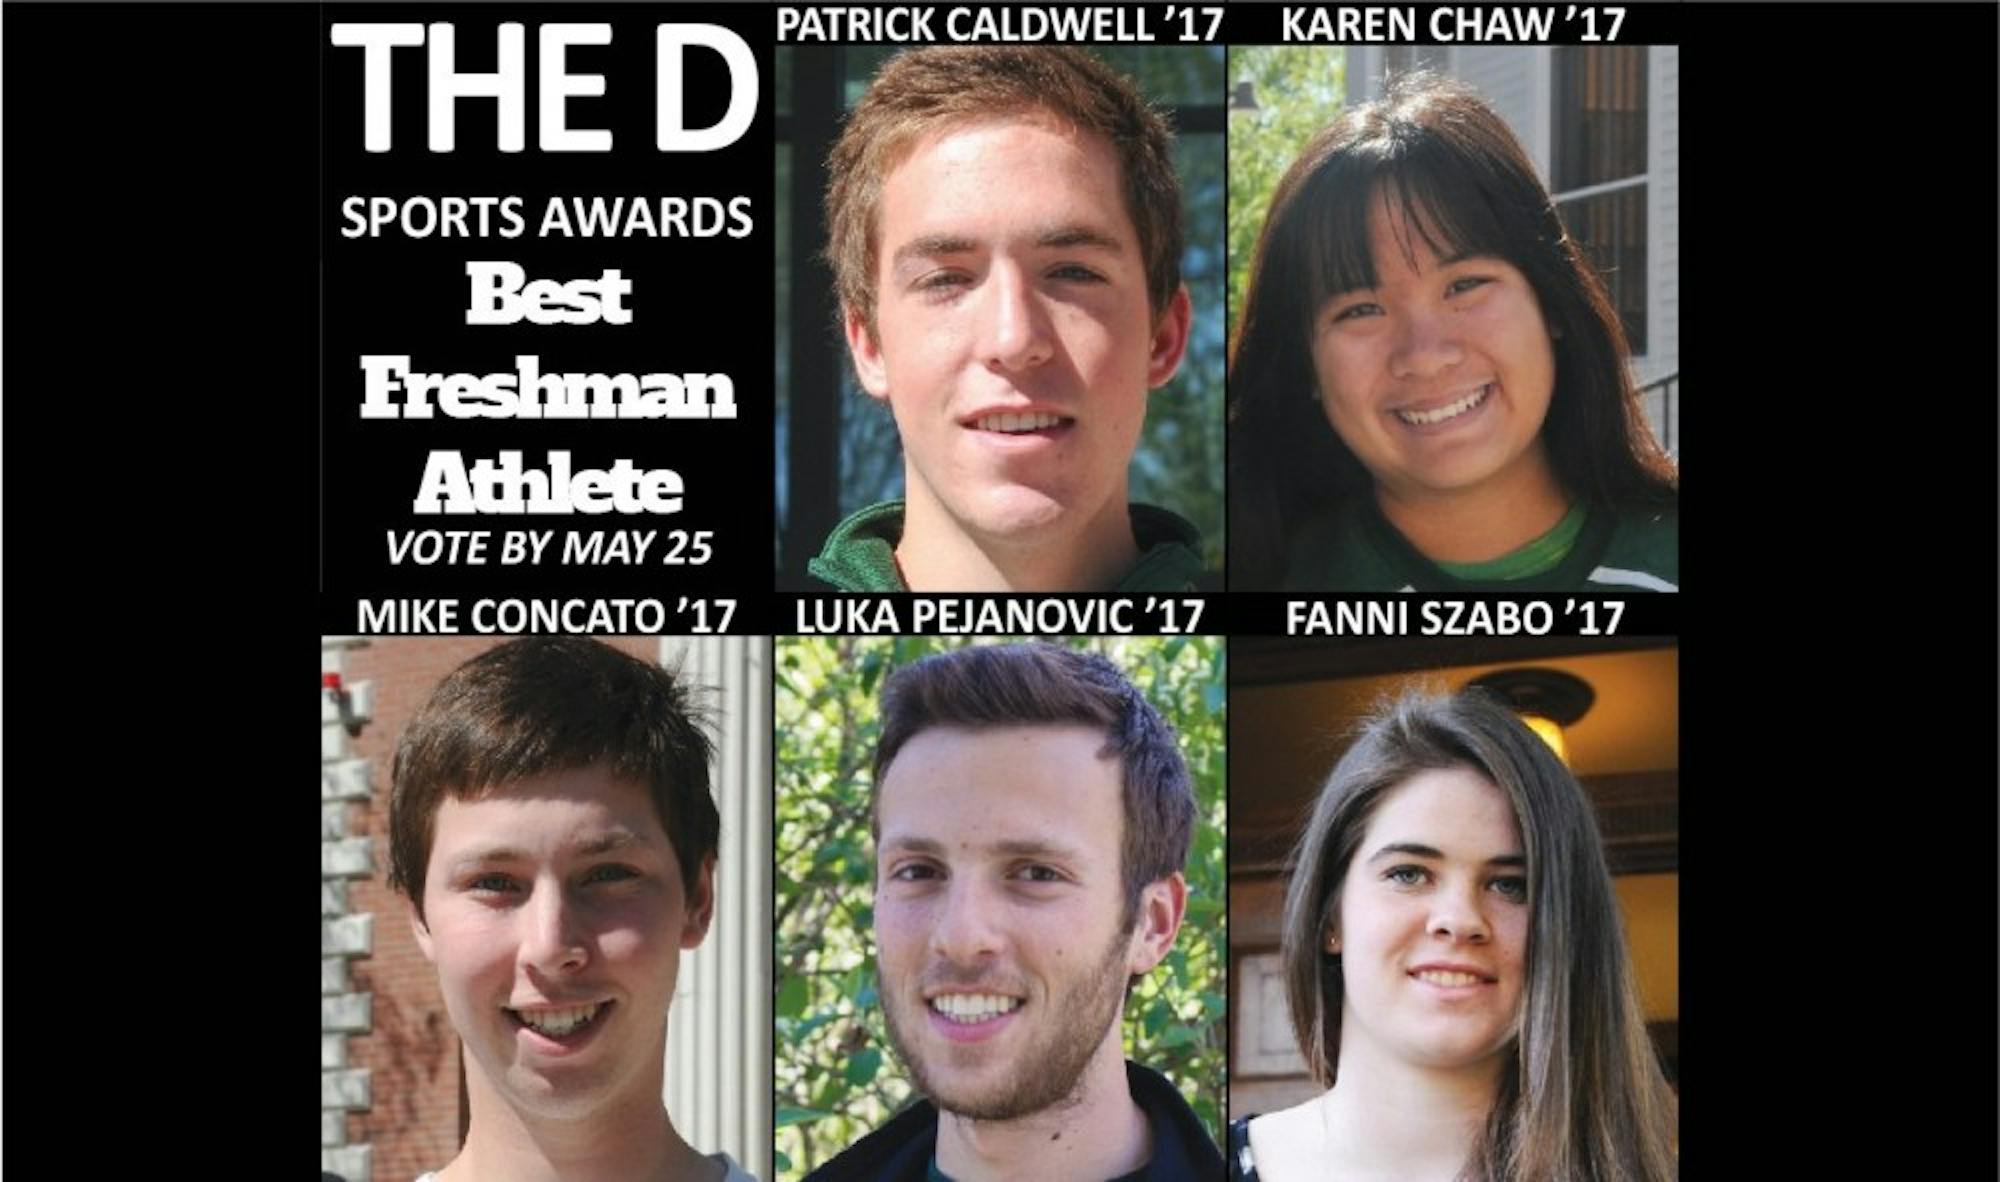 Please vote for the best freshman athlete by May 25.